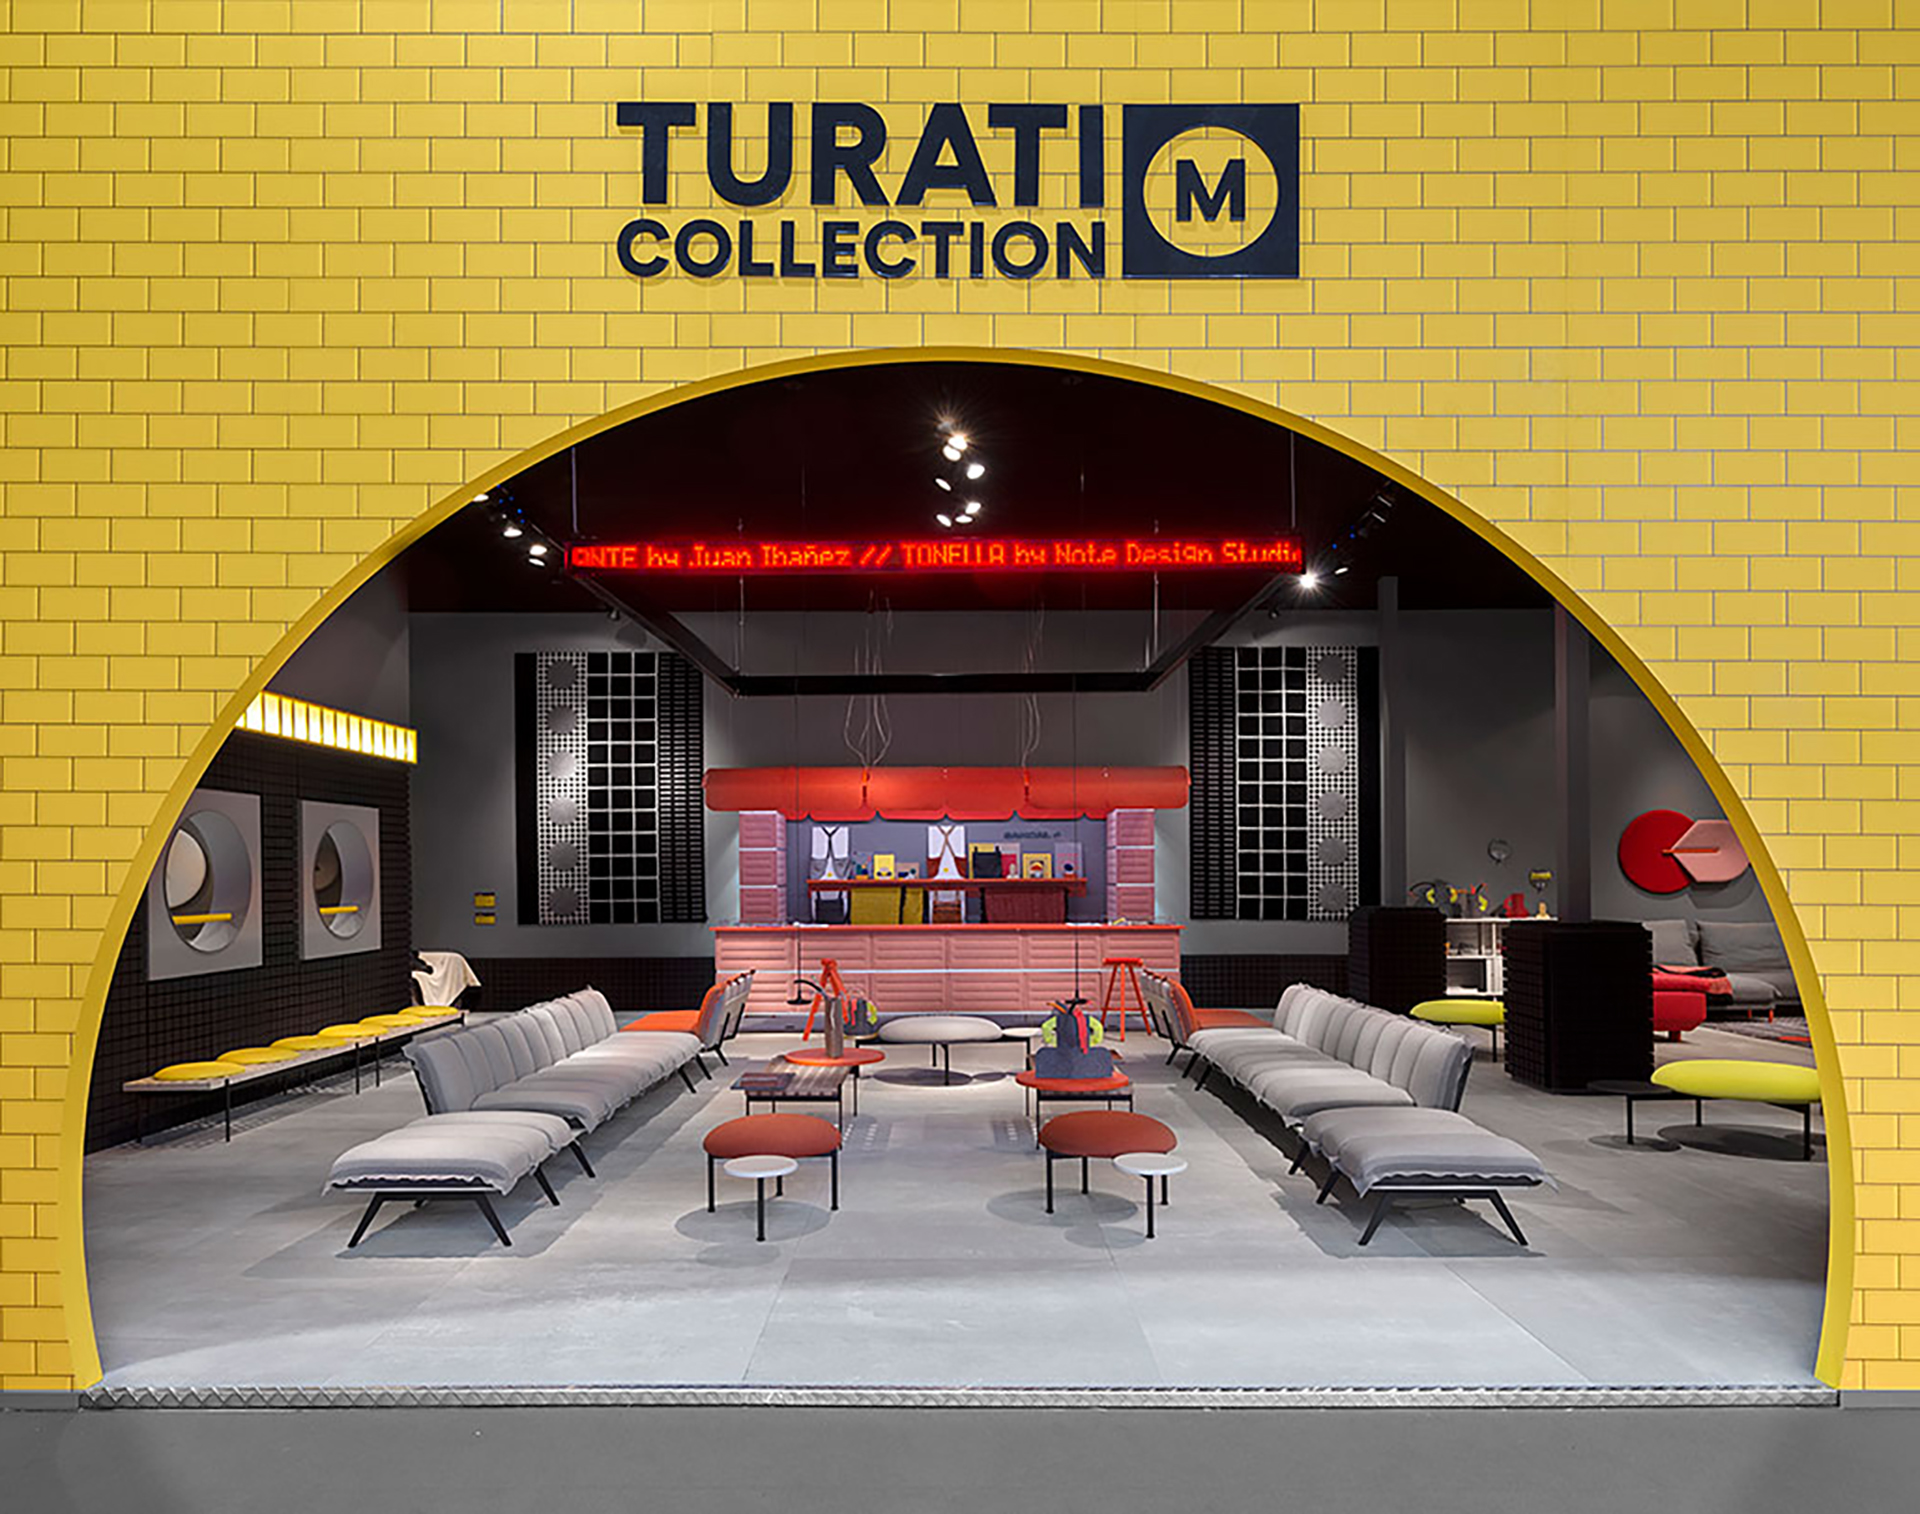 A new collection by Sancal: Turati